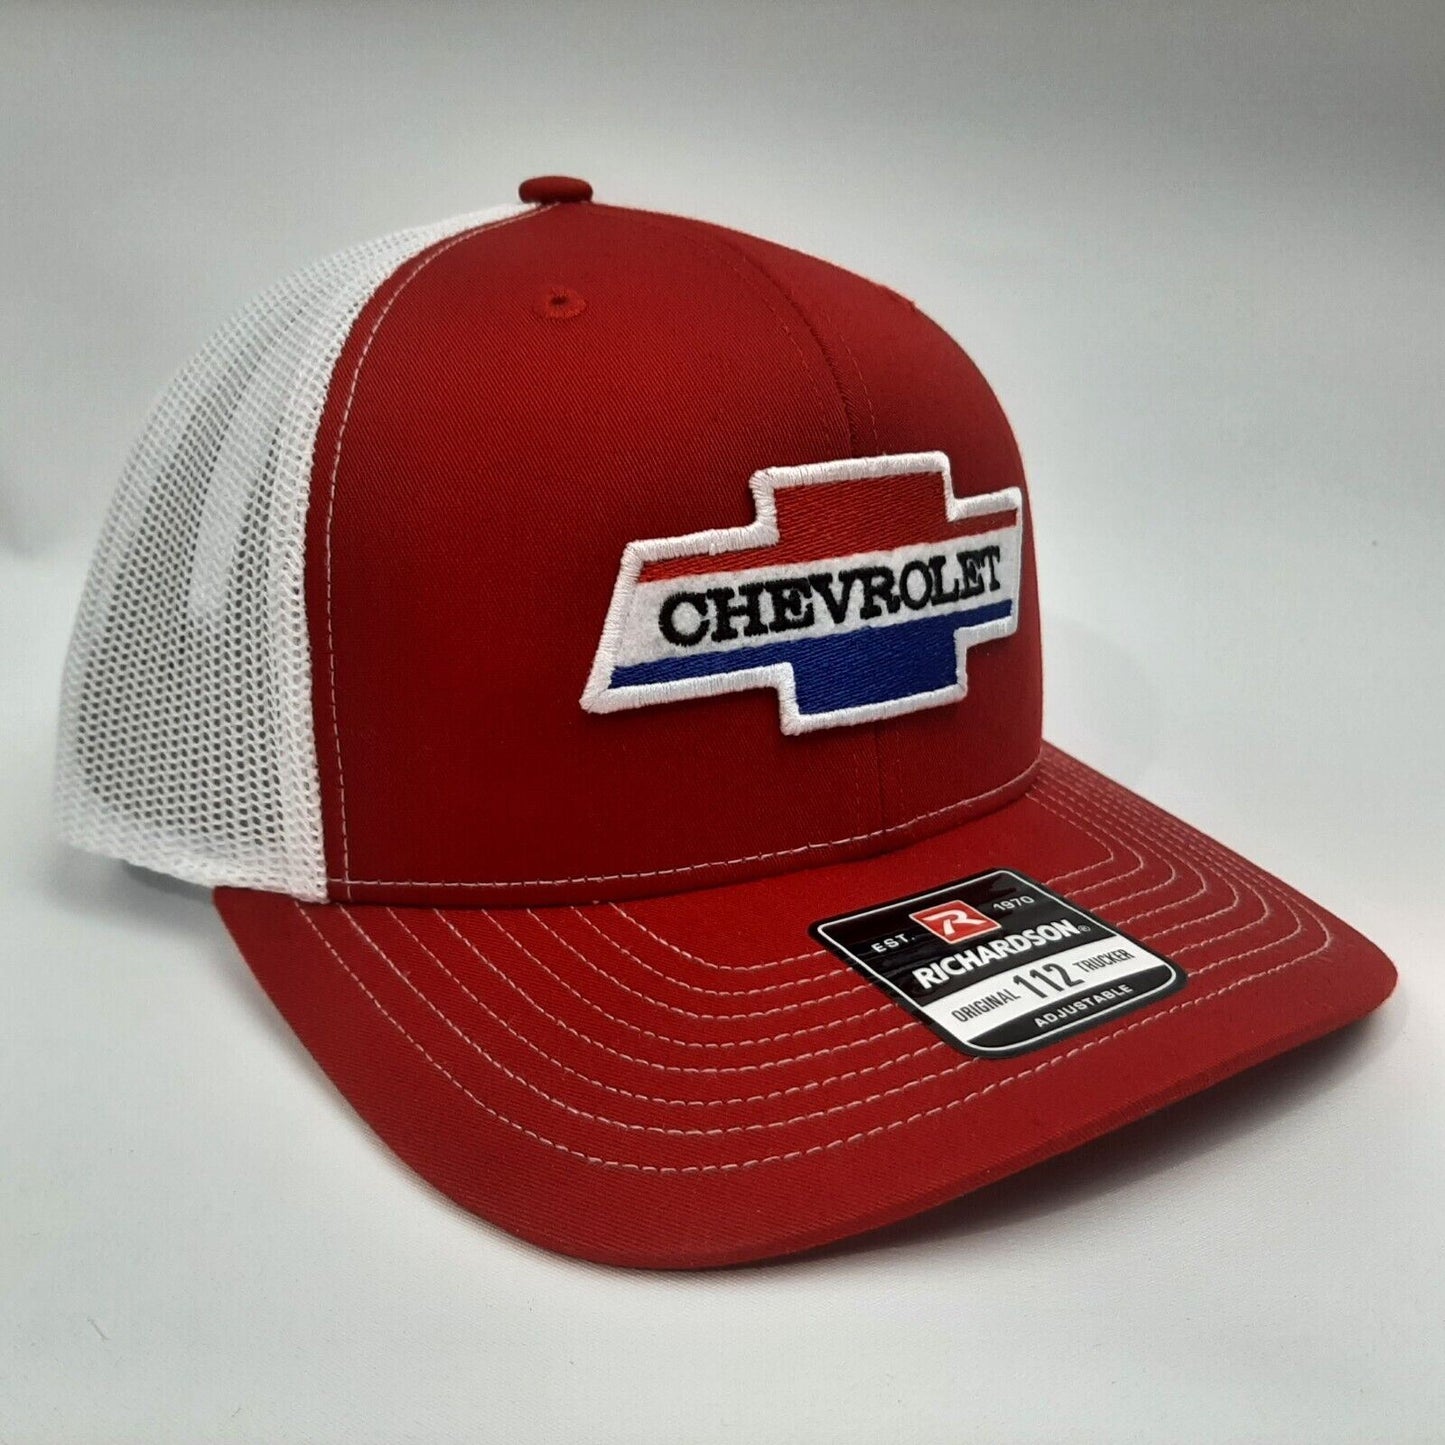 Chevrolet Chevy Embroidered Patch Richardson 112 Trucker Mesh Snapback Cap Hat Red & White